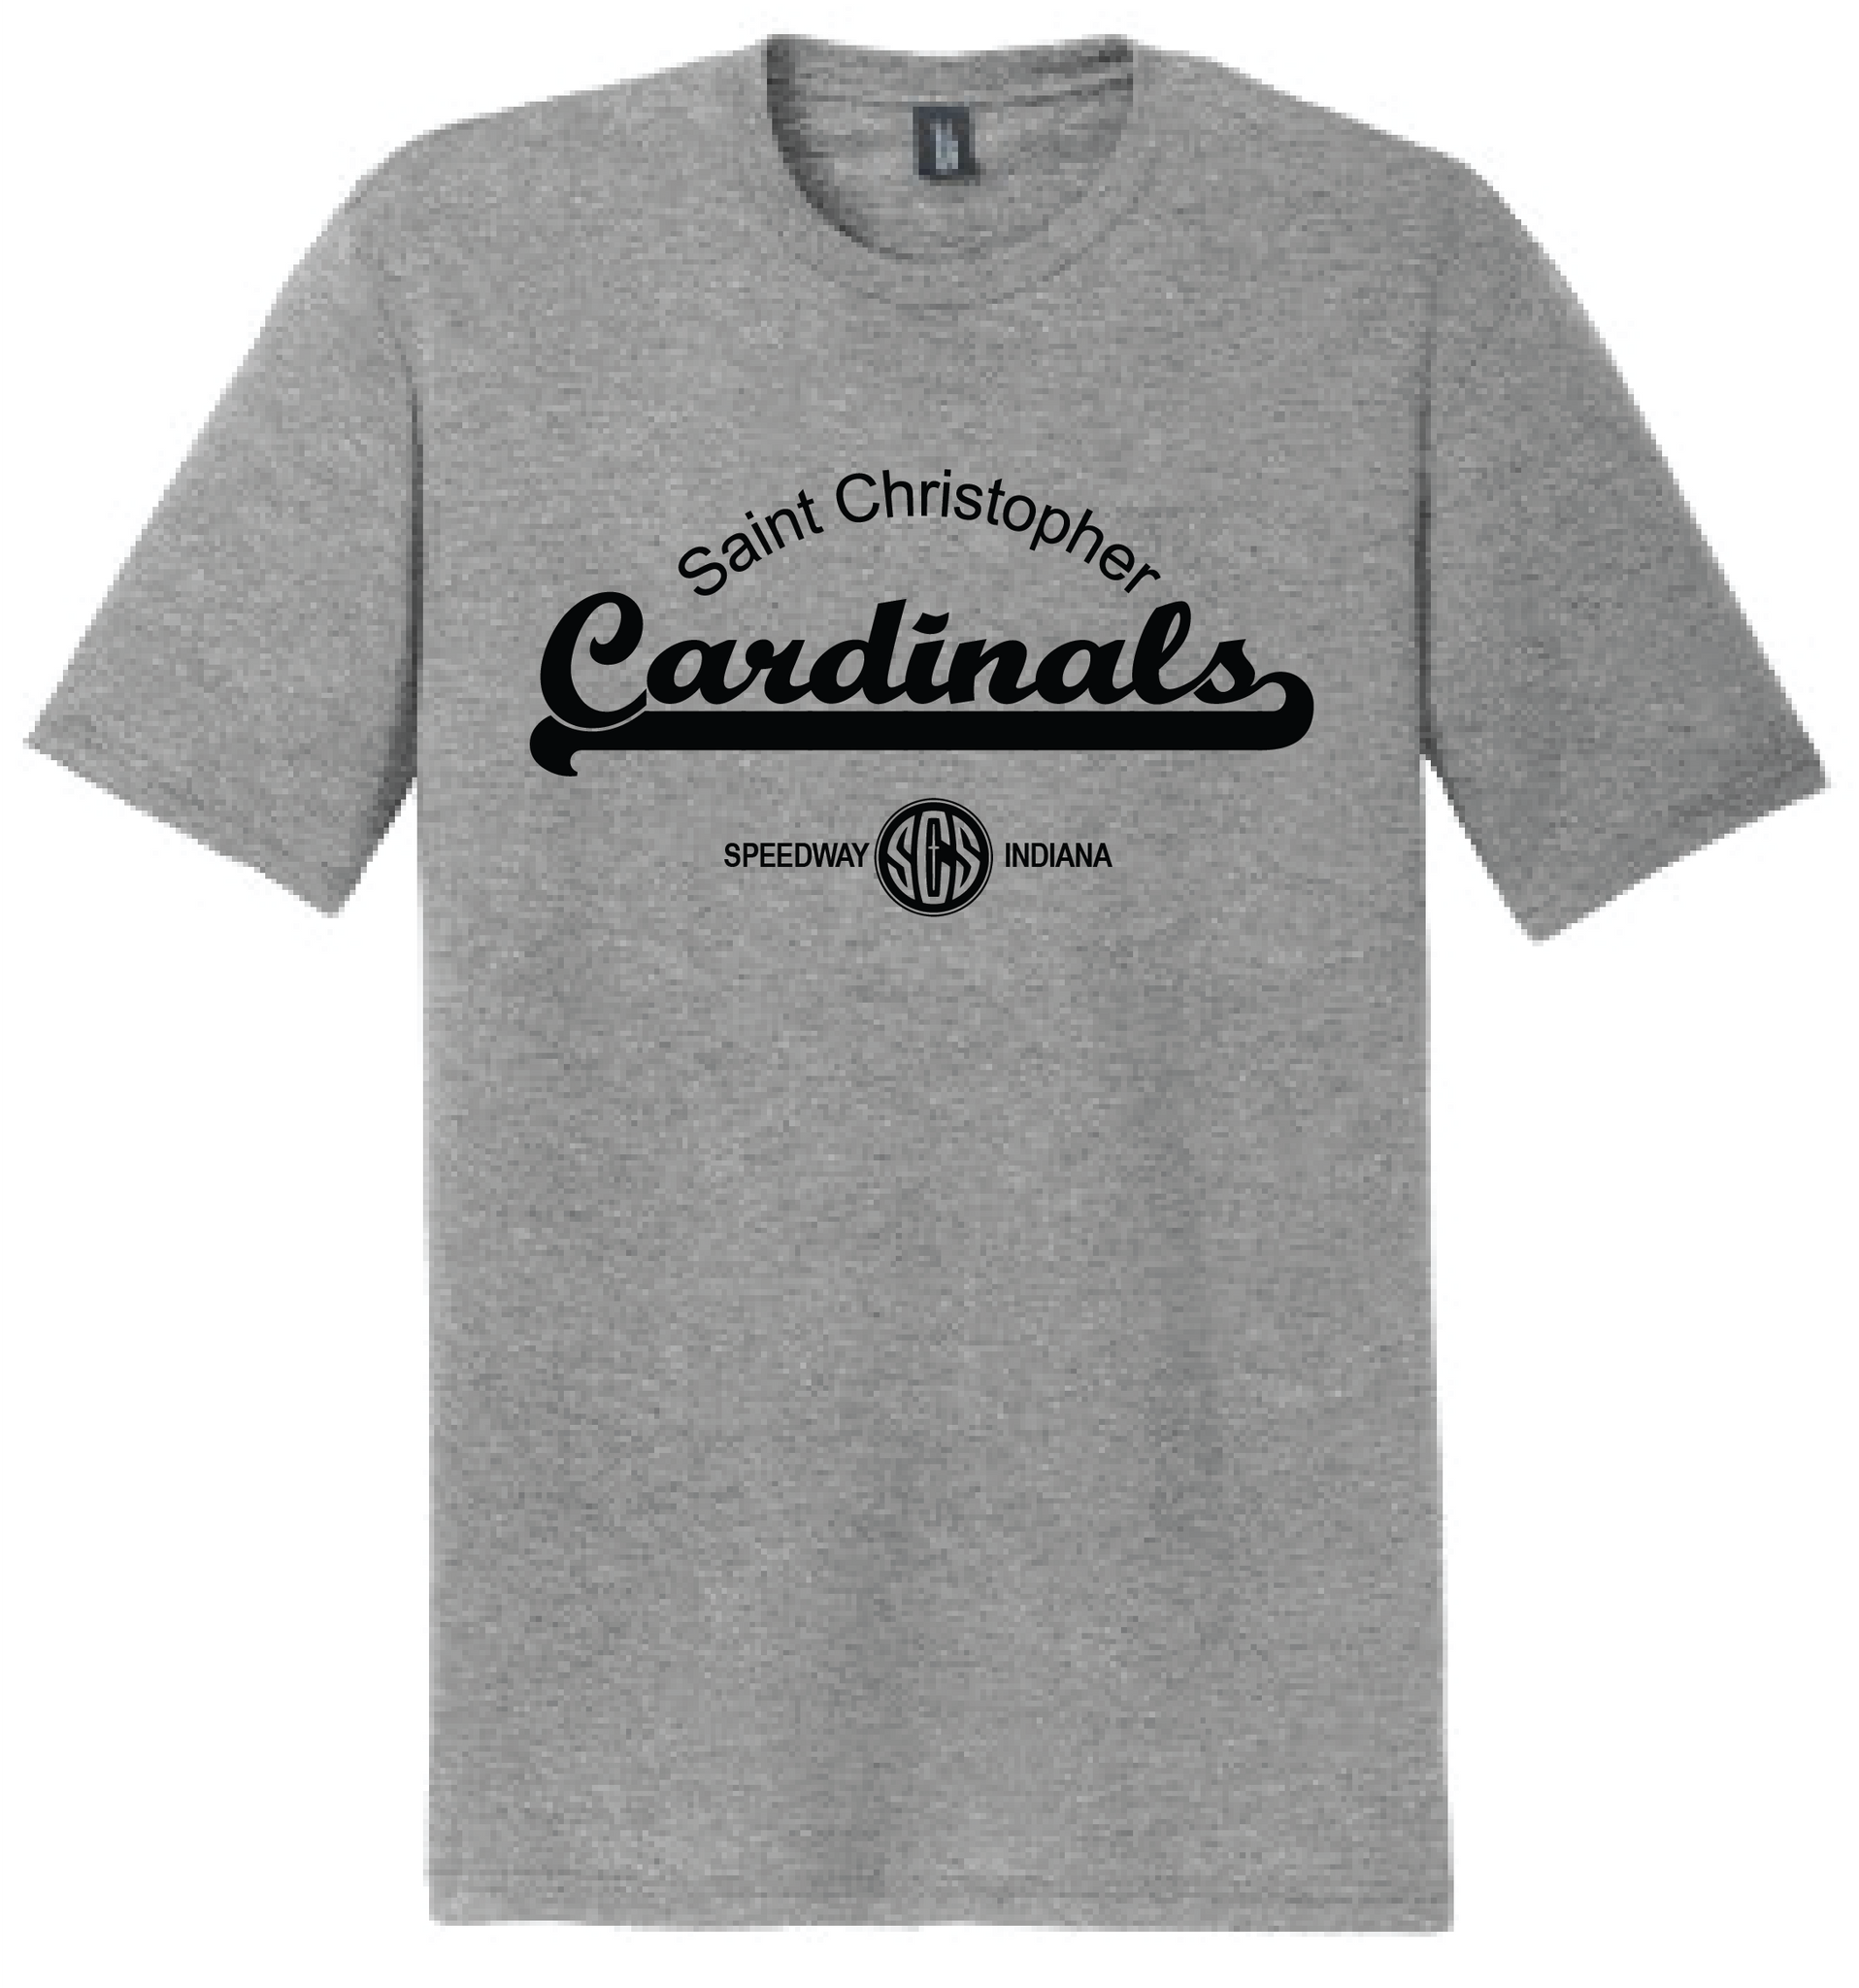 St. Christopher District Made Perfect Tri T-Shirt - Grey Frost